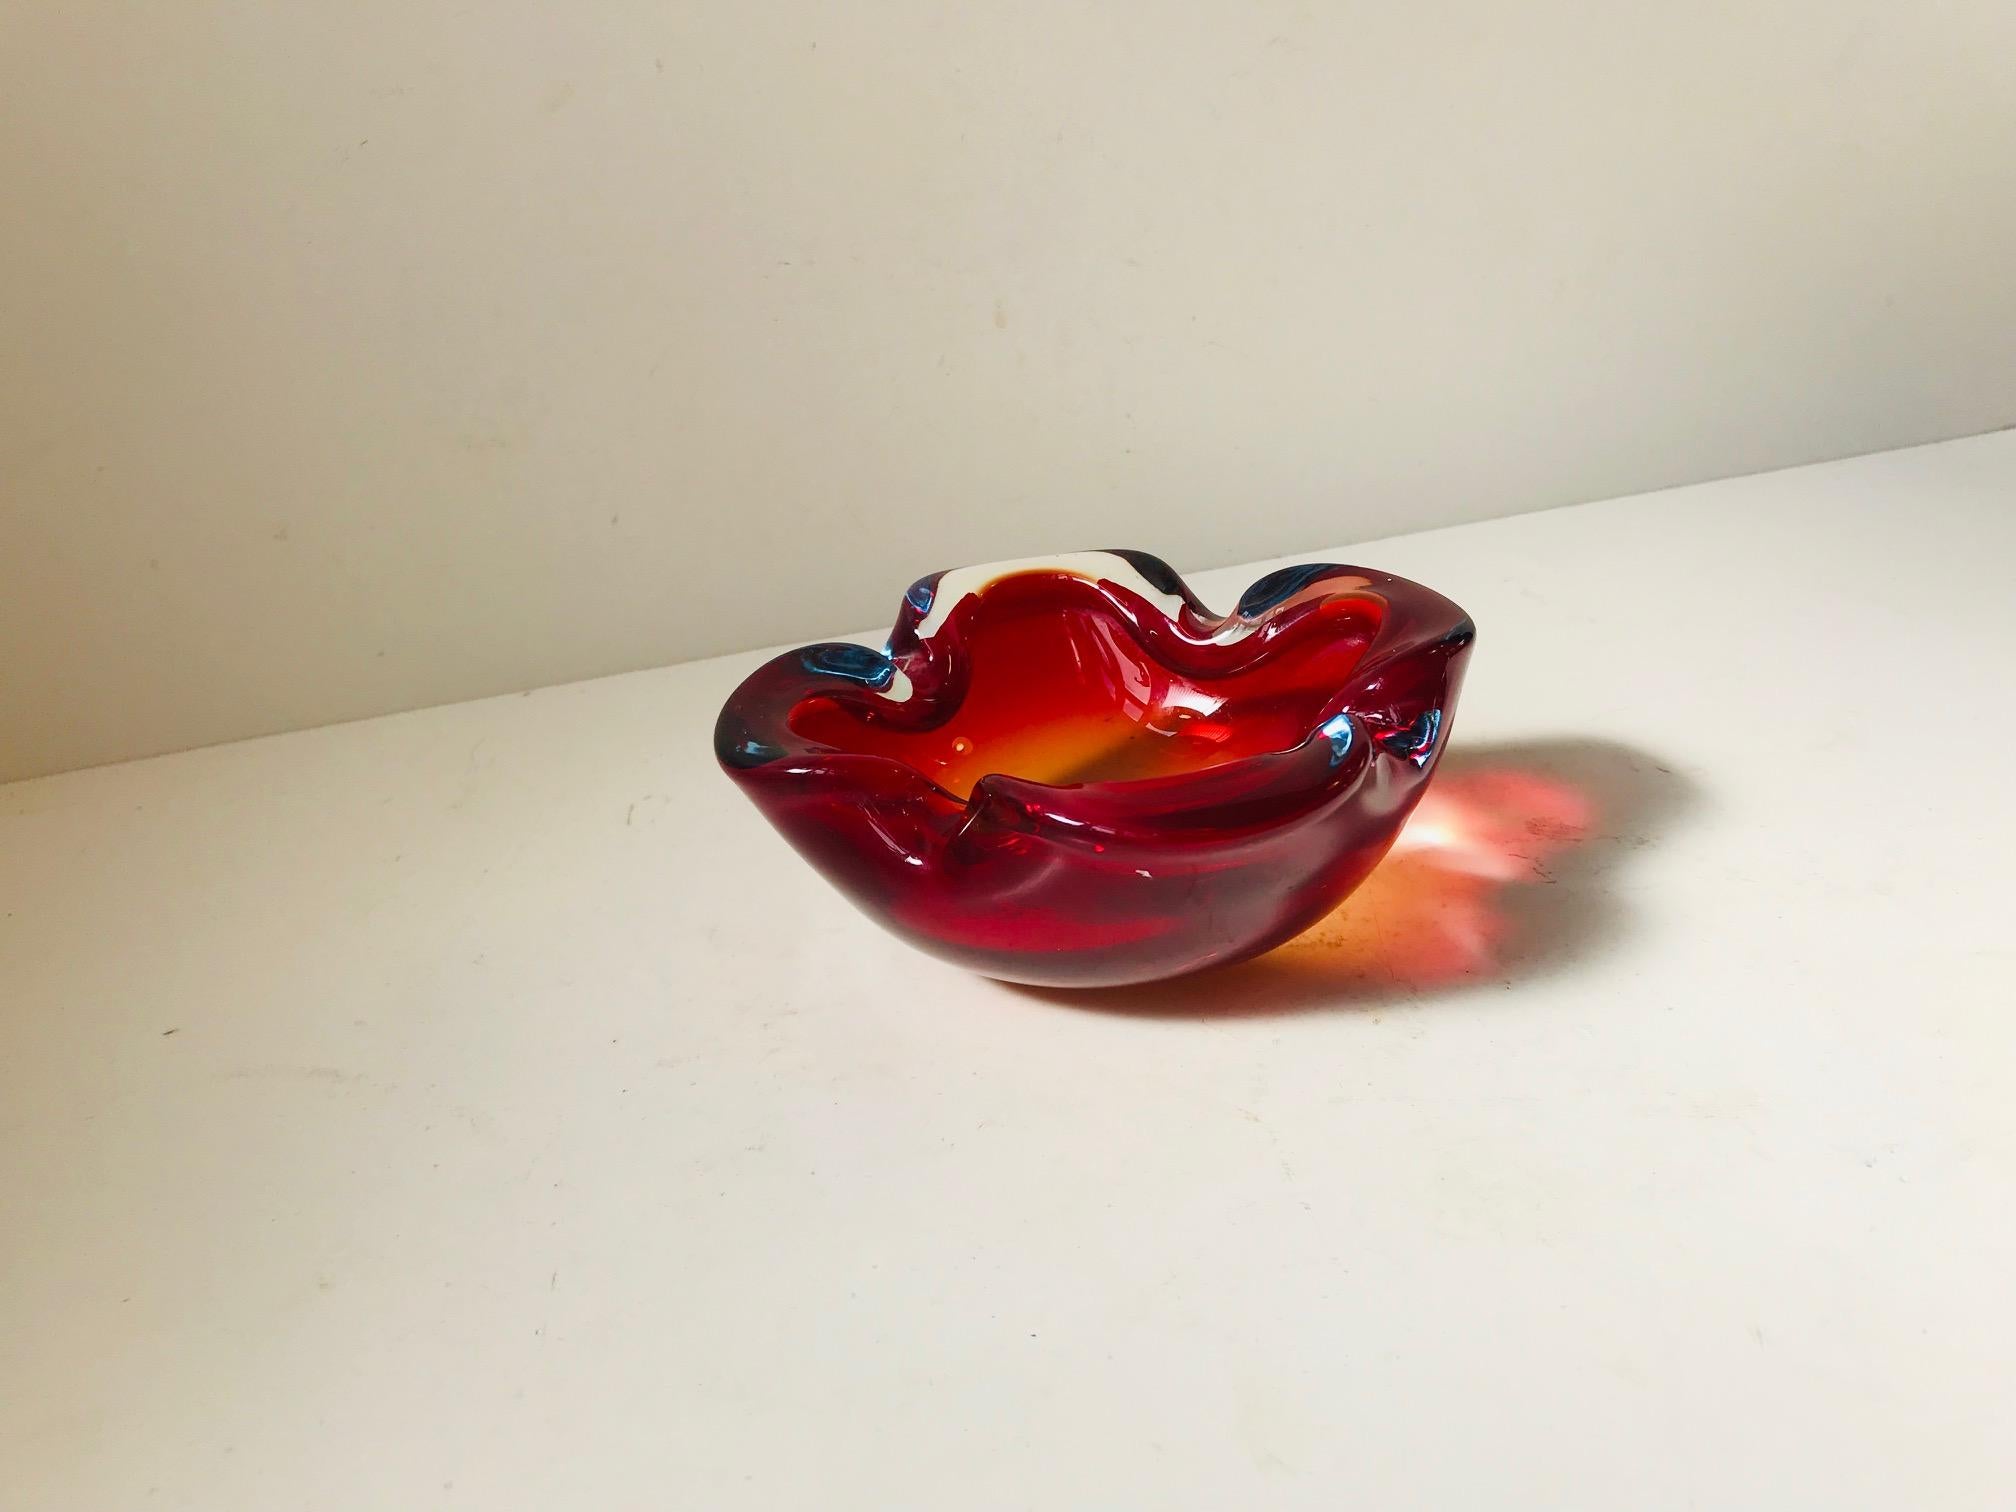 Heavy and thick decorative small bowl or ashtray composed of multicolored Sommerso glass. Designed by Flavio Poli and manufactured at Seguso in Murano Italy during the 1960s.